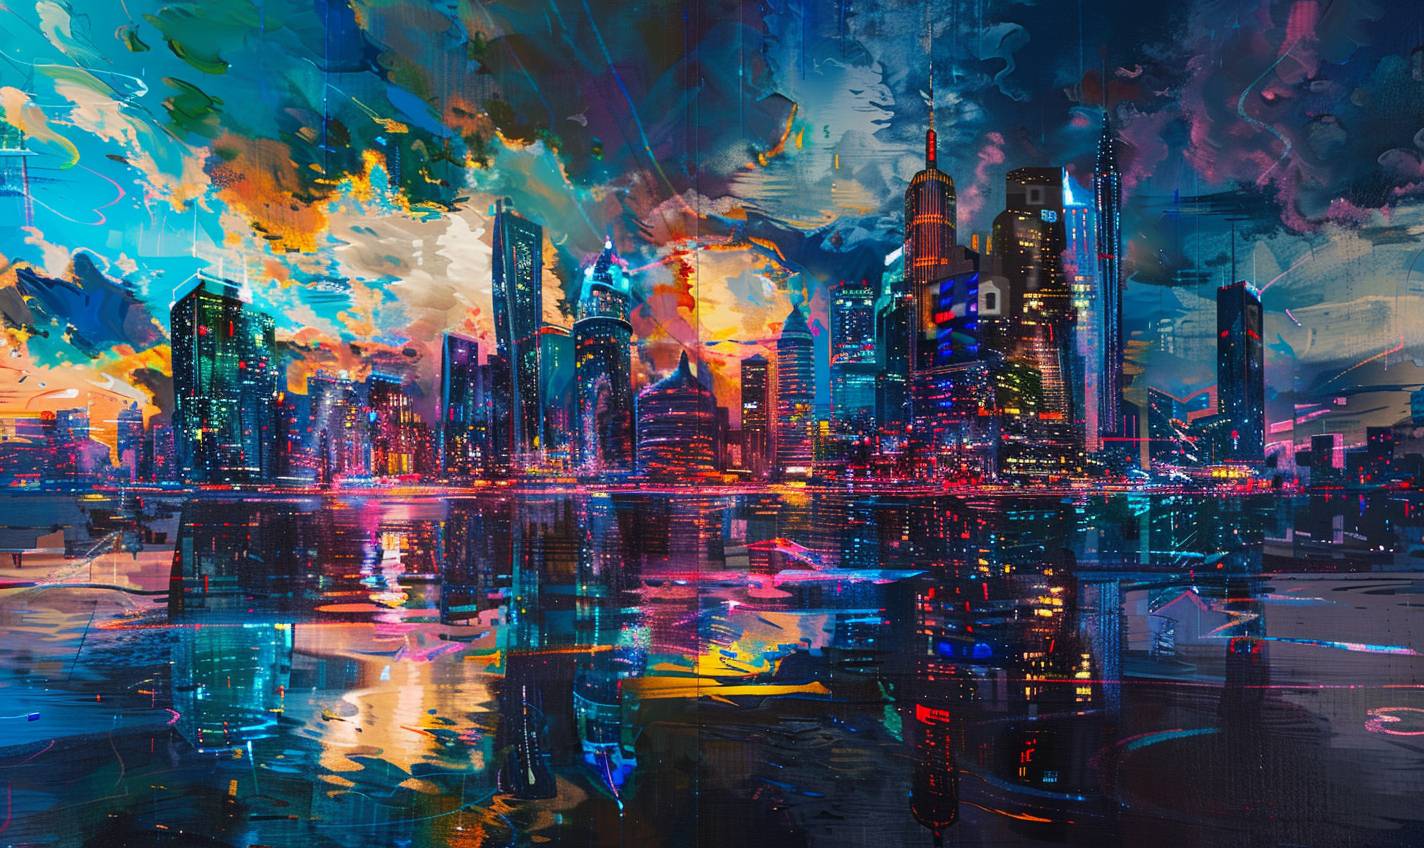 A painting of [SUBJECT], in the style of psychedelic manga, luminous impressionism, intricate and bizarre illustrations, precisionist art, gigantic scale, vibrant skylines, and science-based.